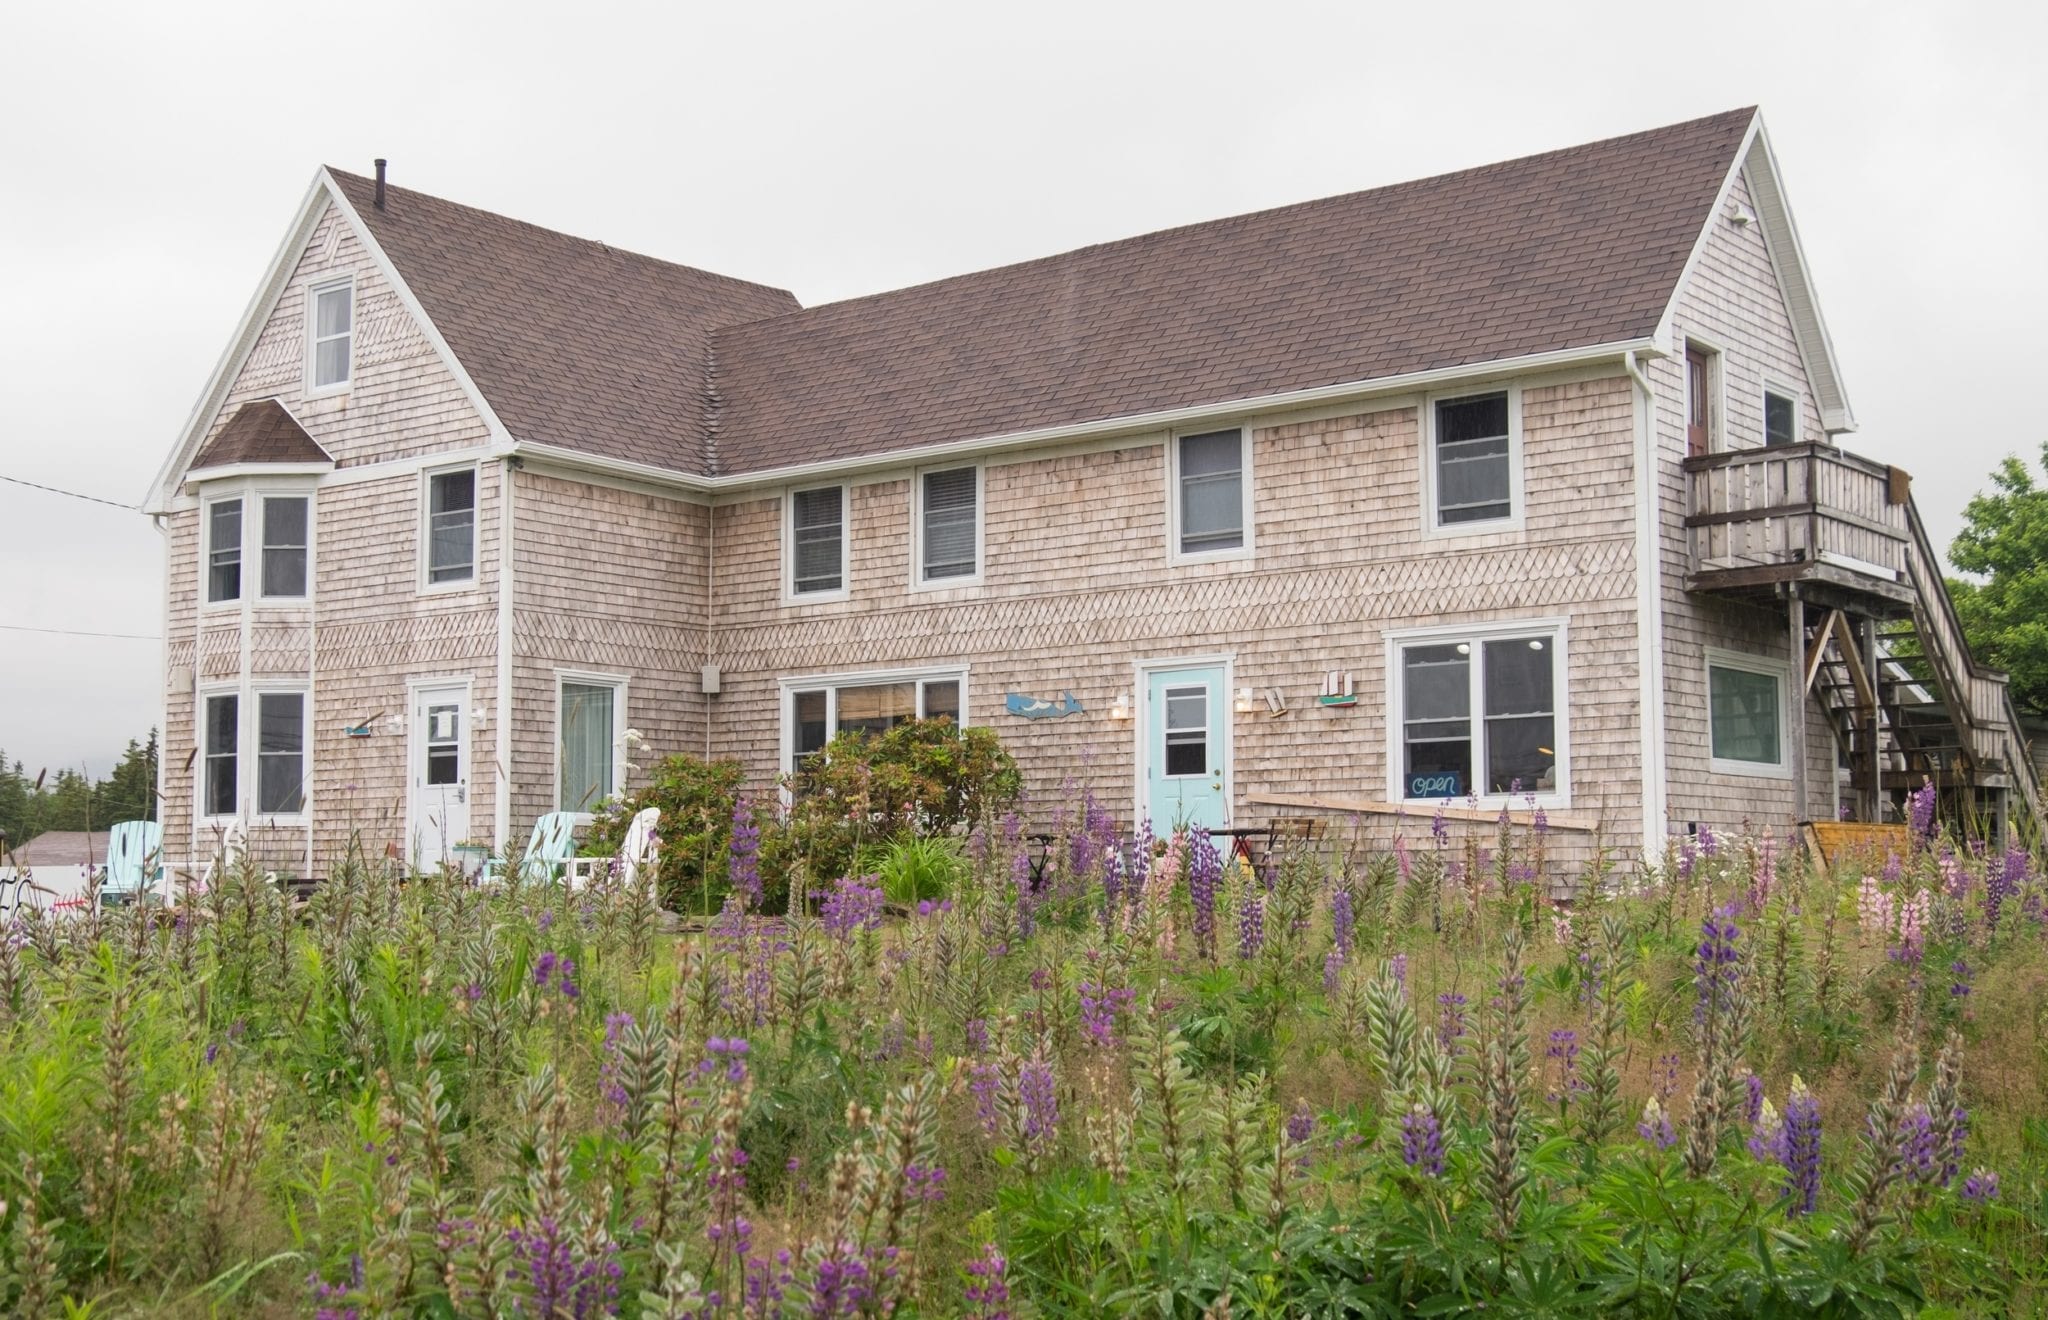 A Scottish-looking gray house in front of purple flowers in Cape Breton.